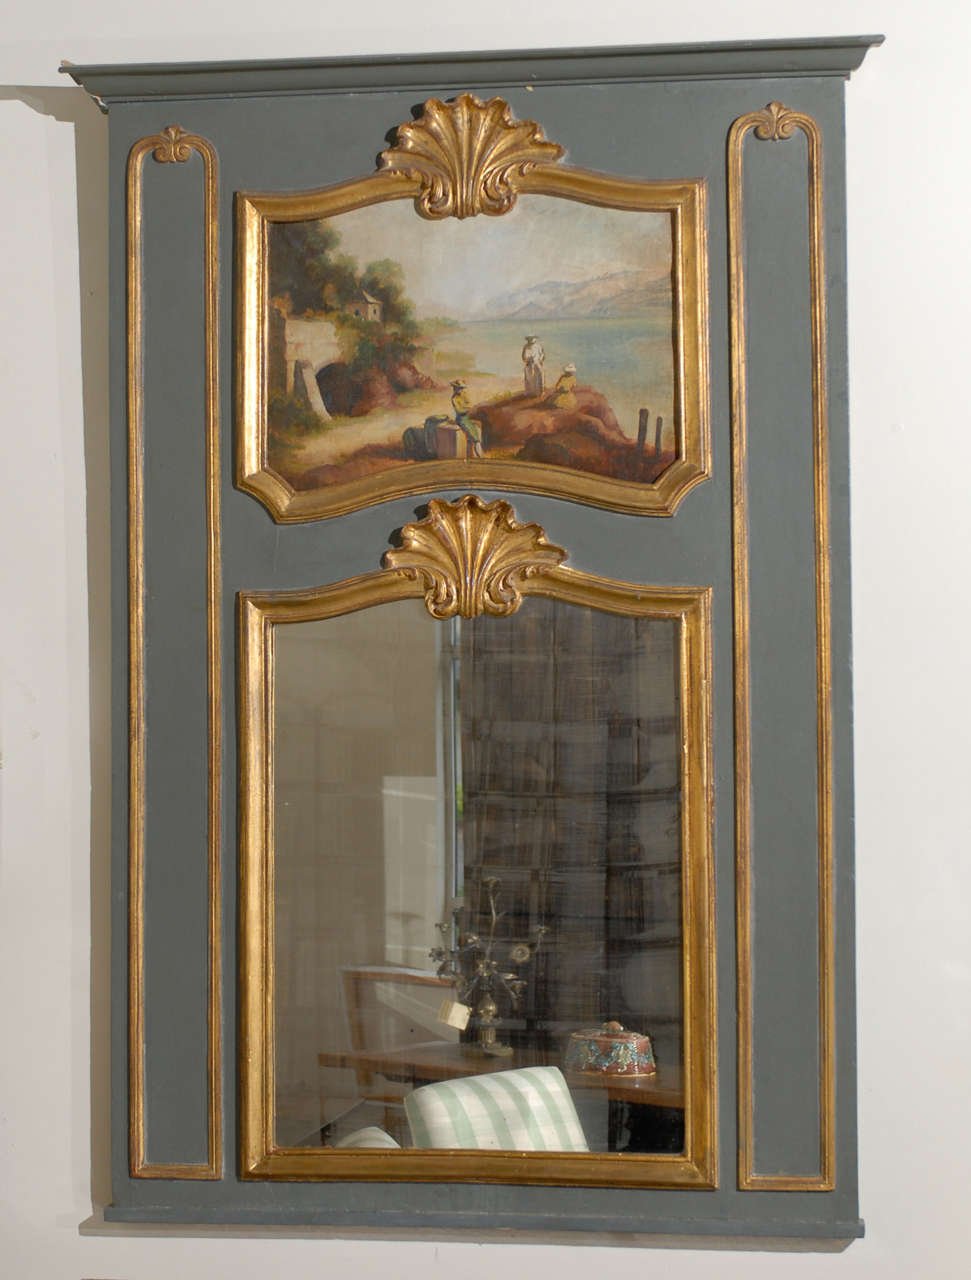 Trumeau Mirror Louis XV-XVI French

Louis XV/XVI traditional Trumeau mirror with a flat  molded cornice; the upper panel with shell crest and shaped raised molding trimmed with gold leaf, enclosing a landscape scene of 3 figures by a lake, a stone